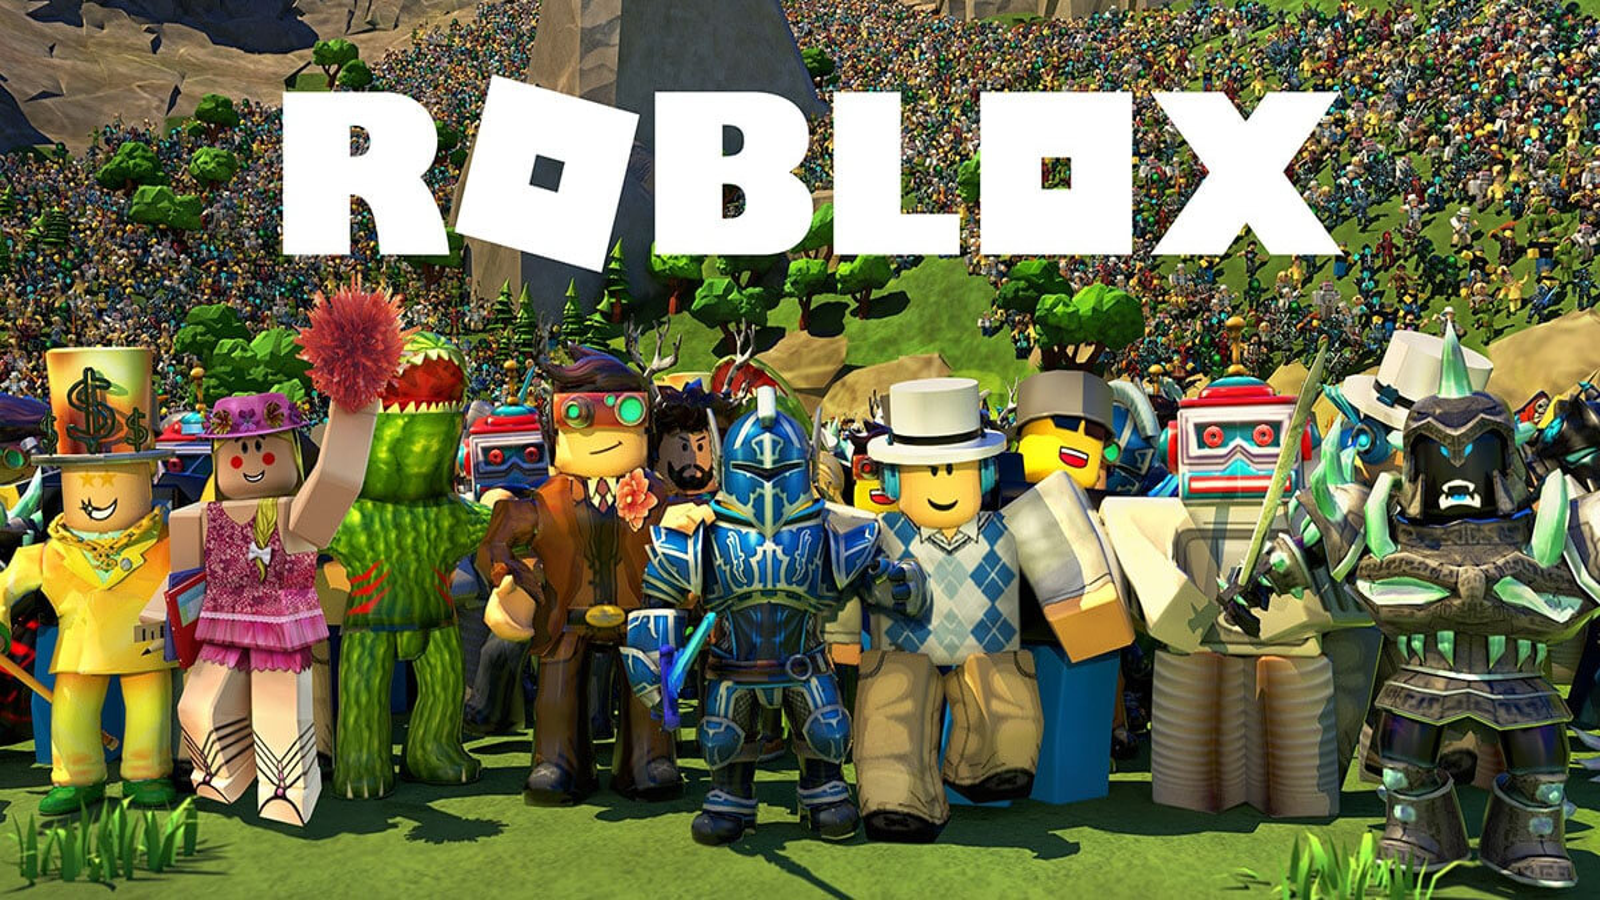 Top 15 Most Fun Roblox Games to play when your bored, Real-Time   Video View Count